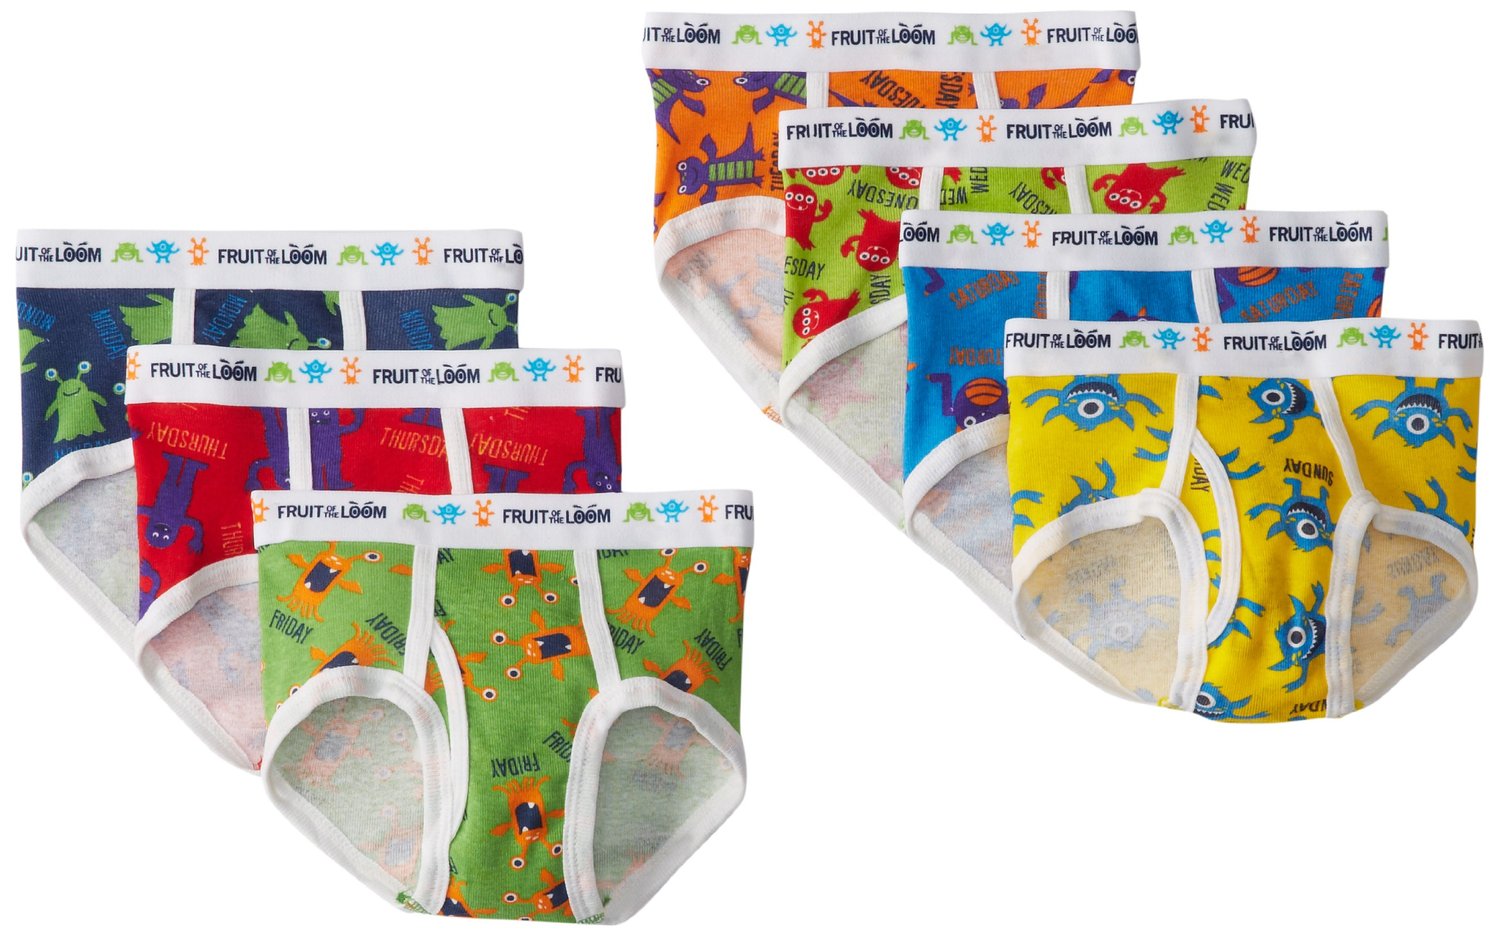 FTL-7P801PT - Fruit of the Loom Toddler Boys` 7-Pack Days of the Week Briefs